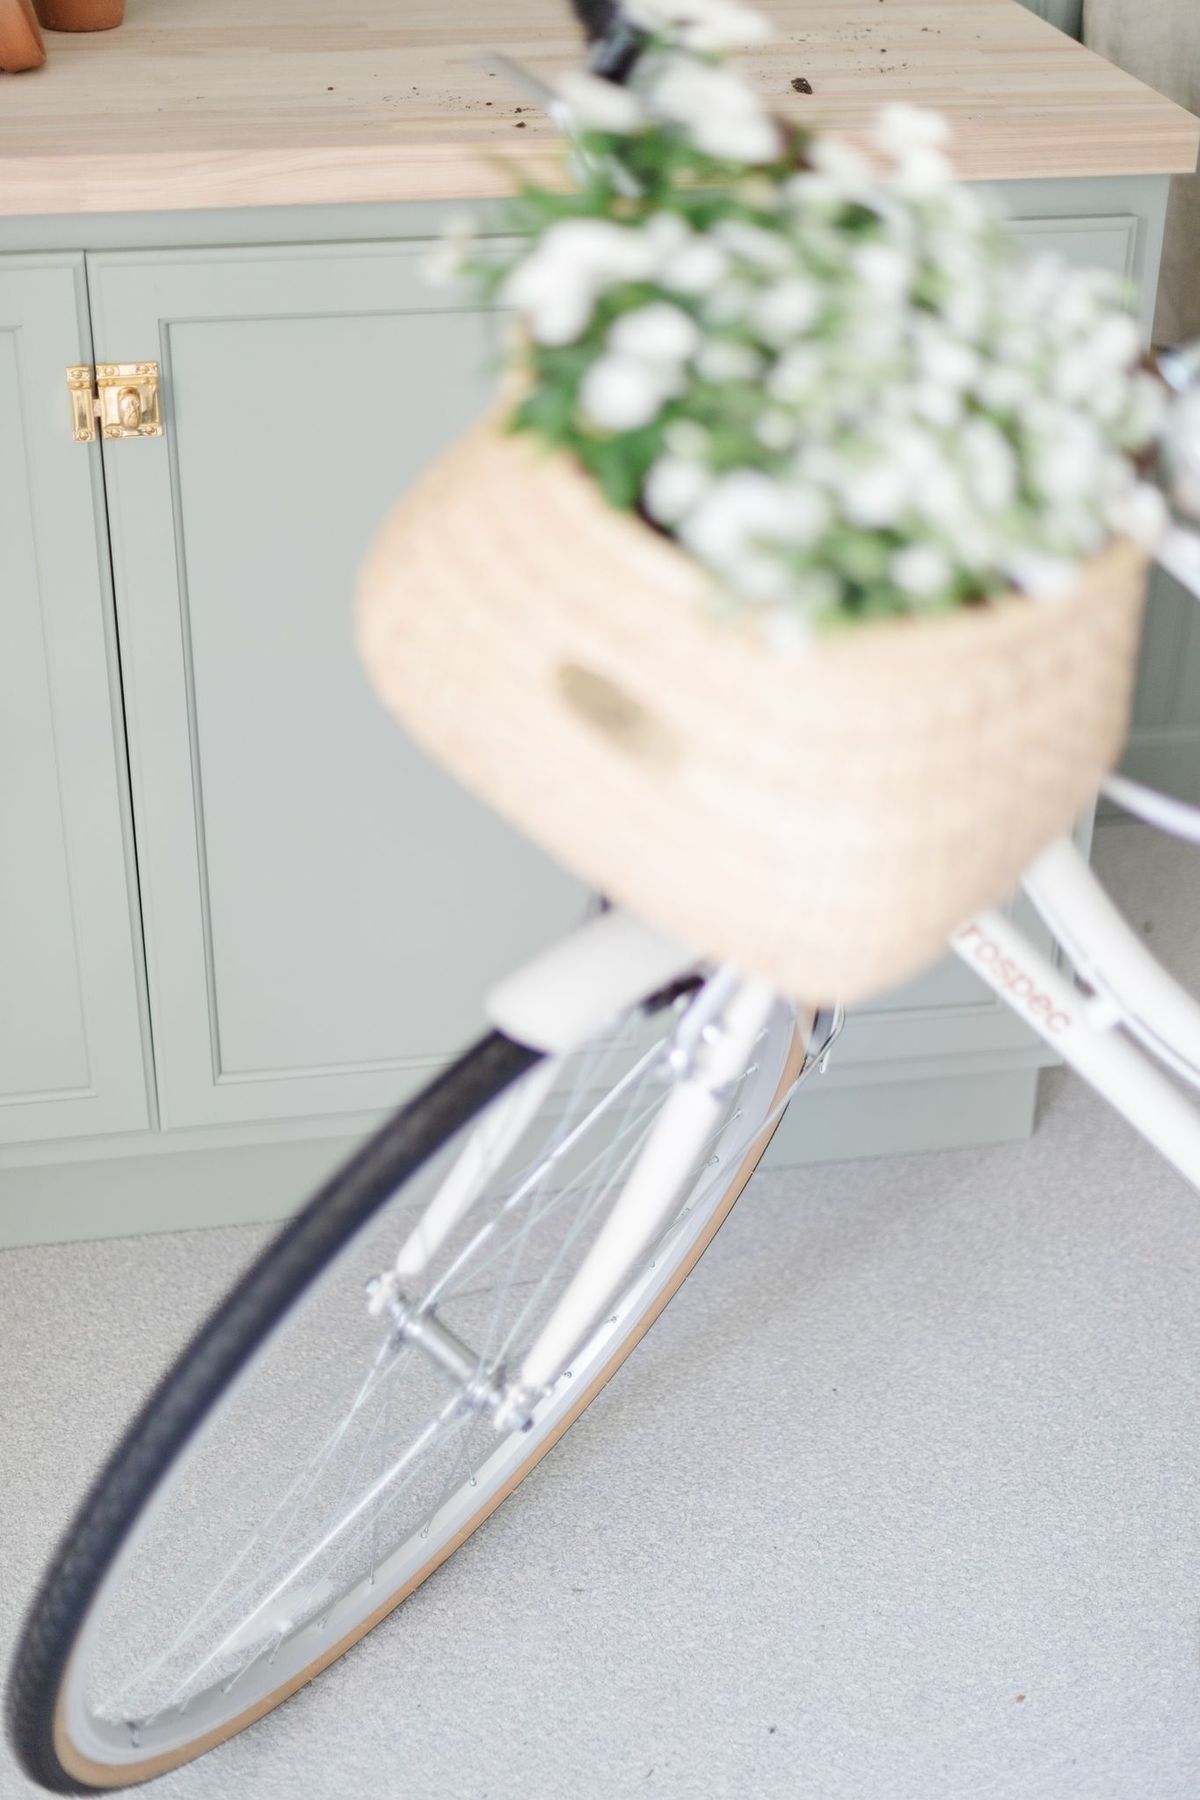 A white bike with a flower basket, in a garage with a greige garage floor coating.